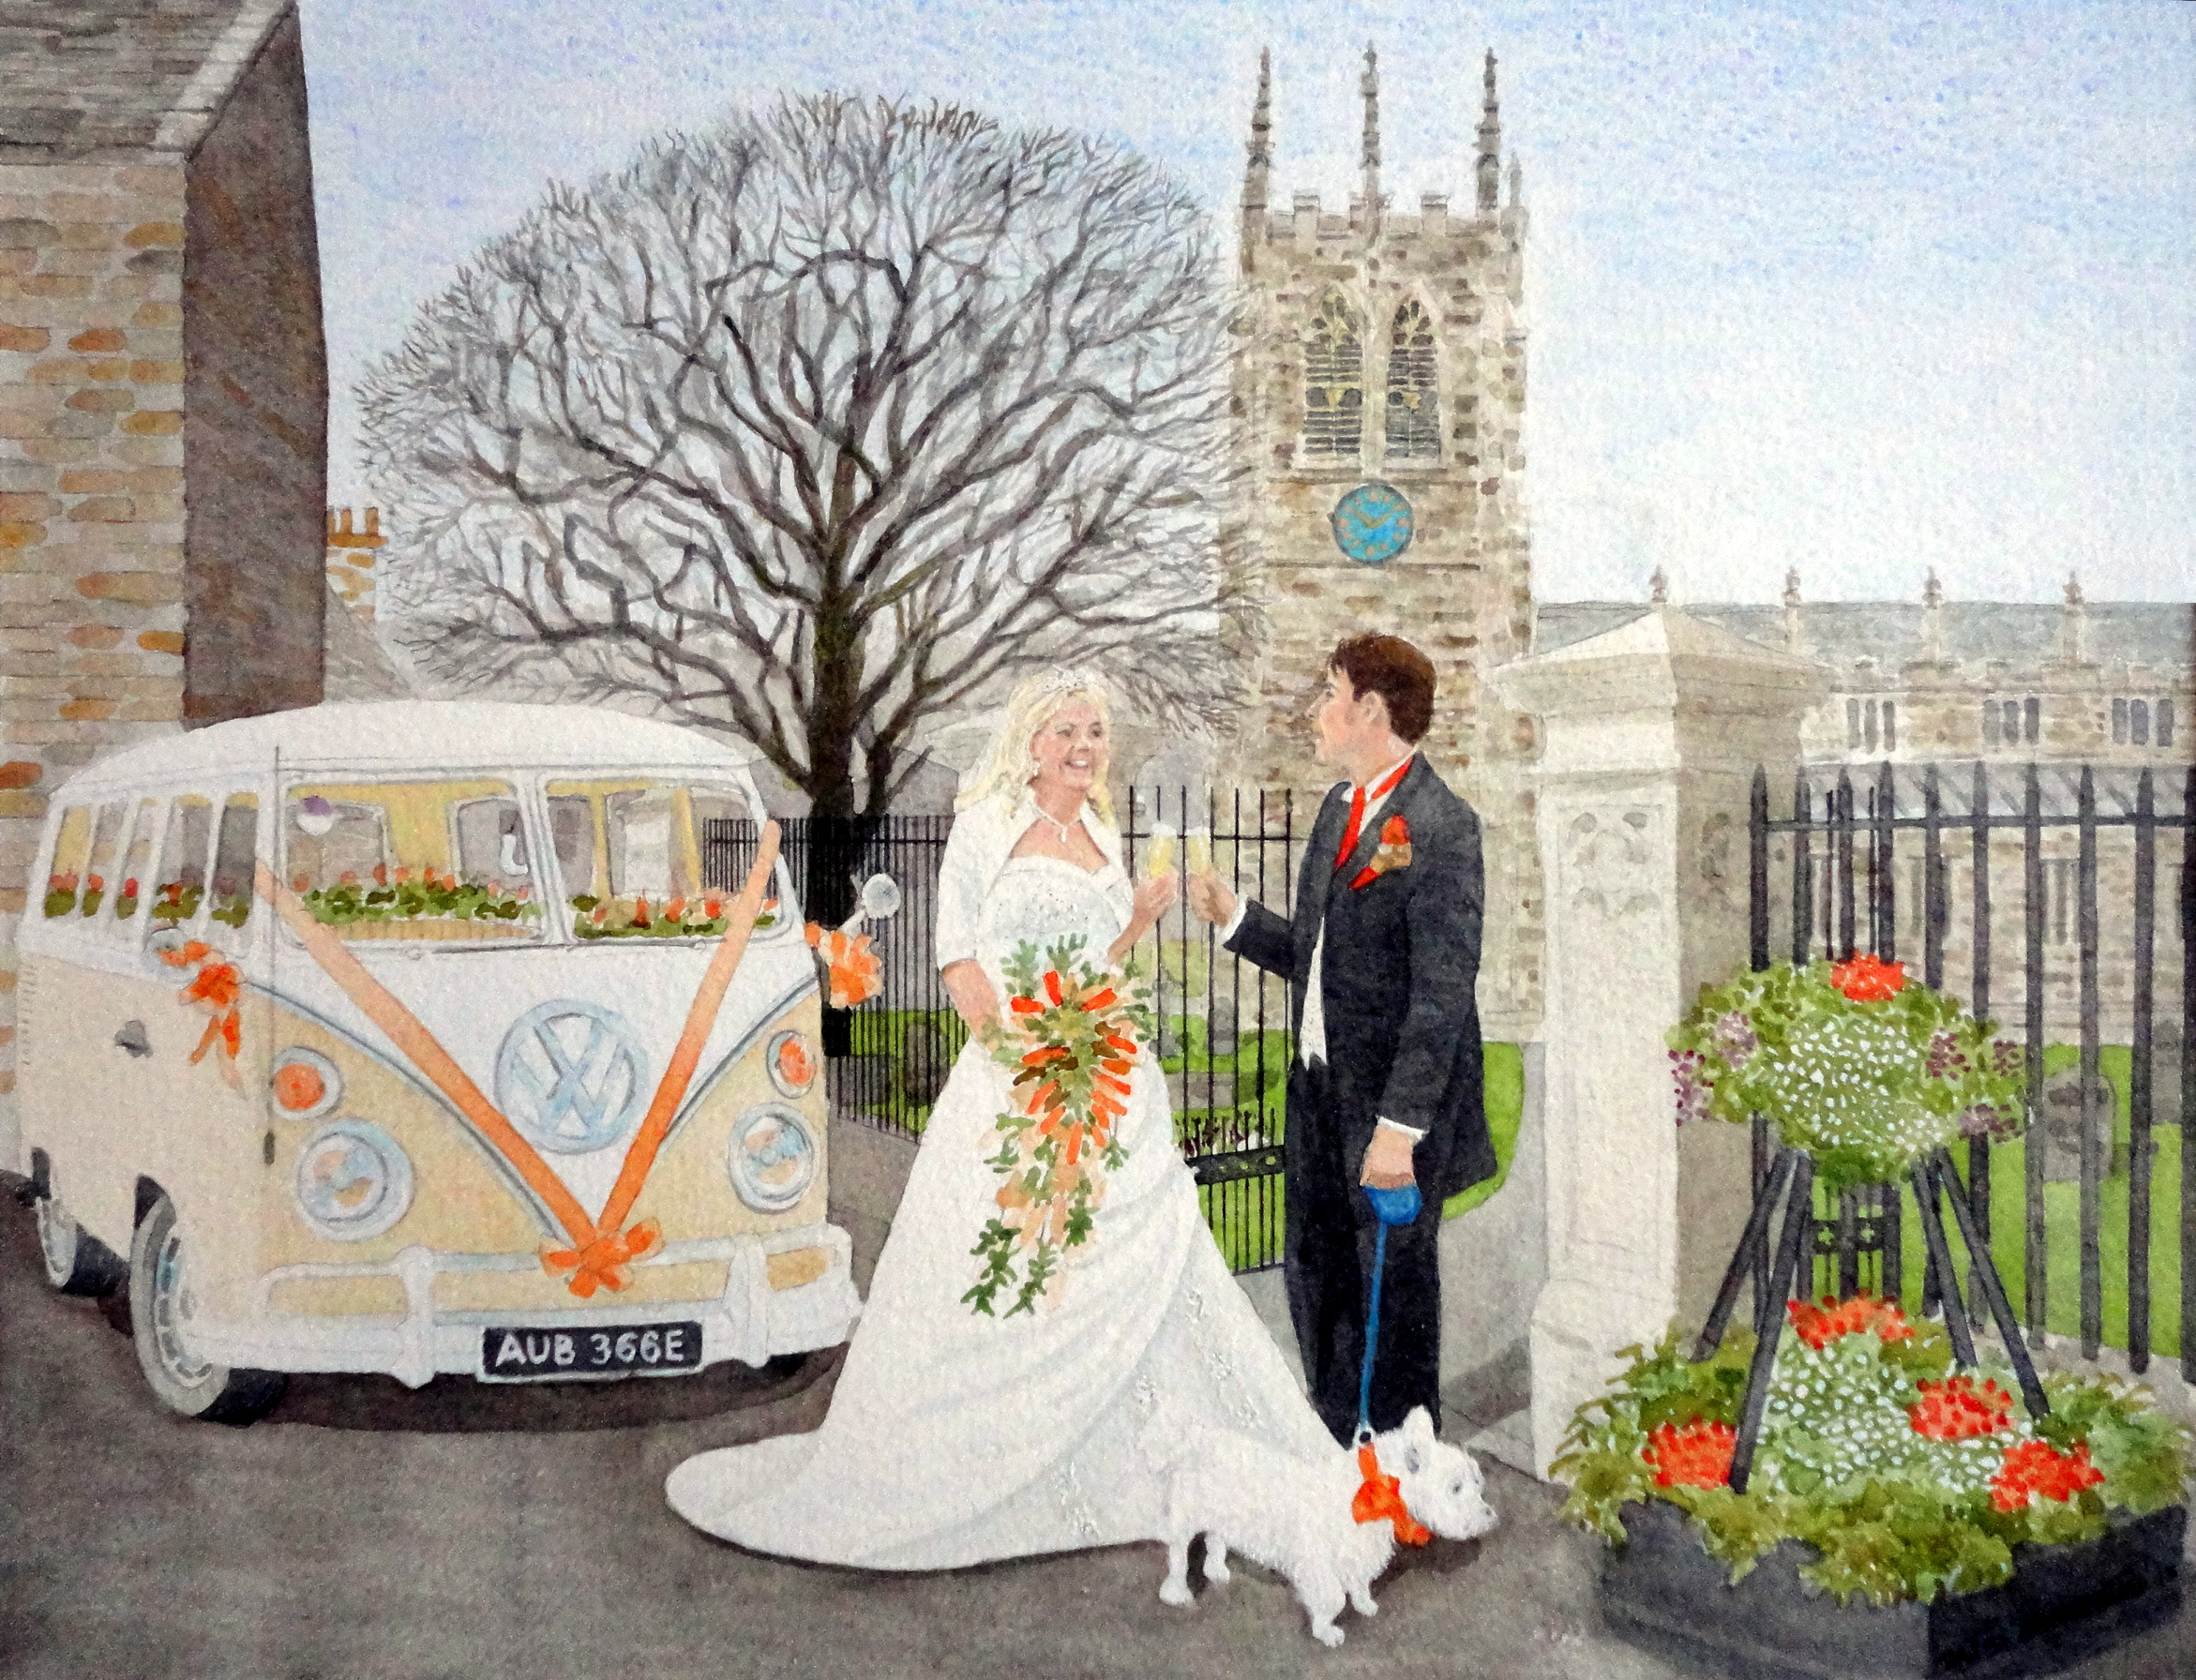 SURPRISE WEDDING PRESENT FOR YOUNG GUN AND HIS WIFE painted by DAVID APPLEYARD